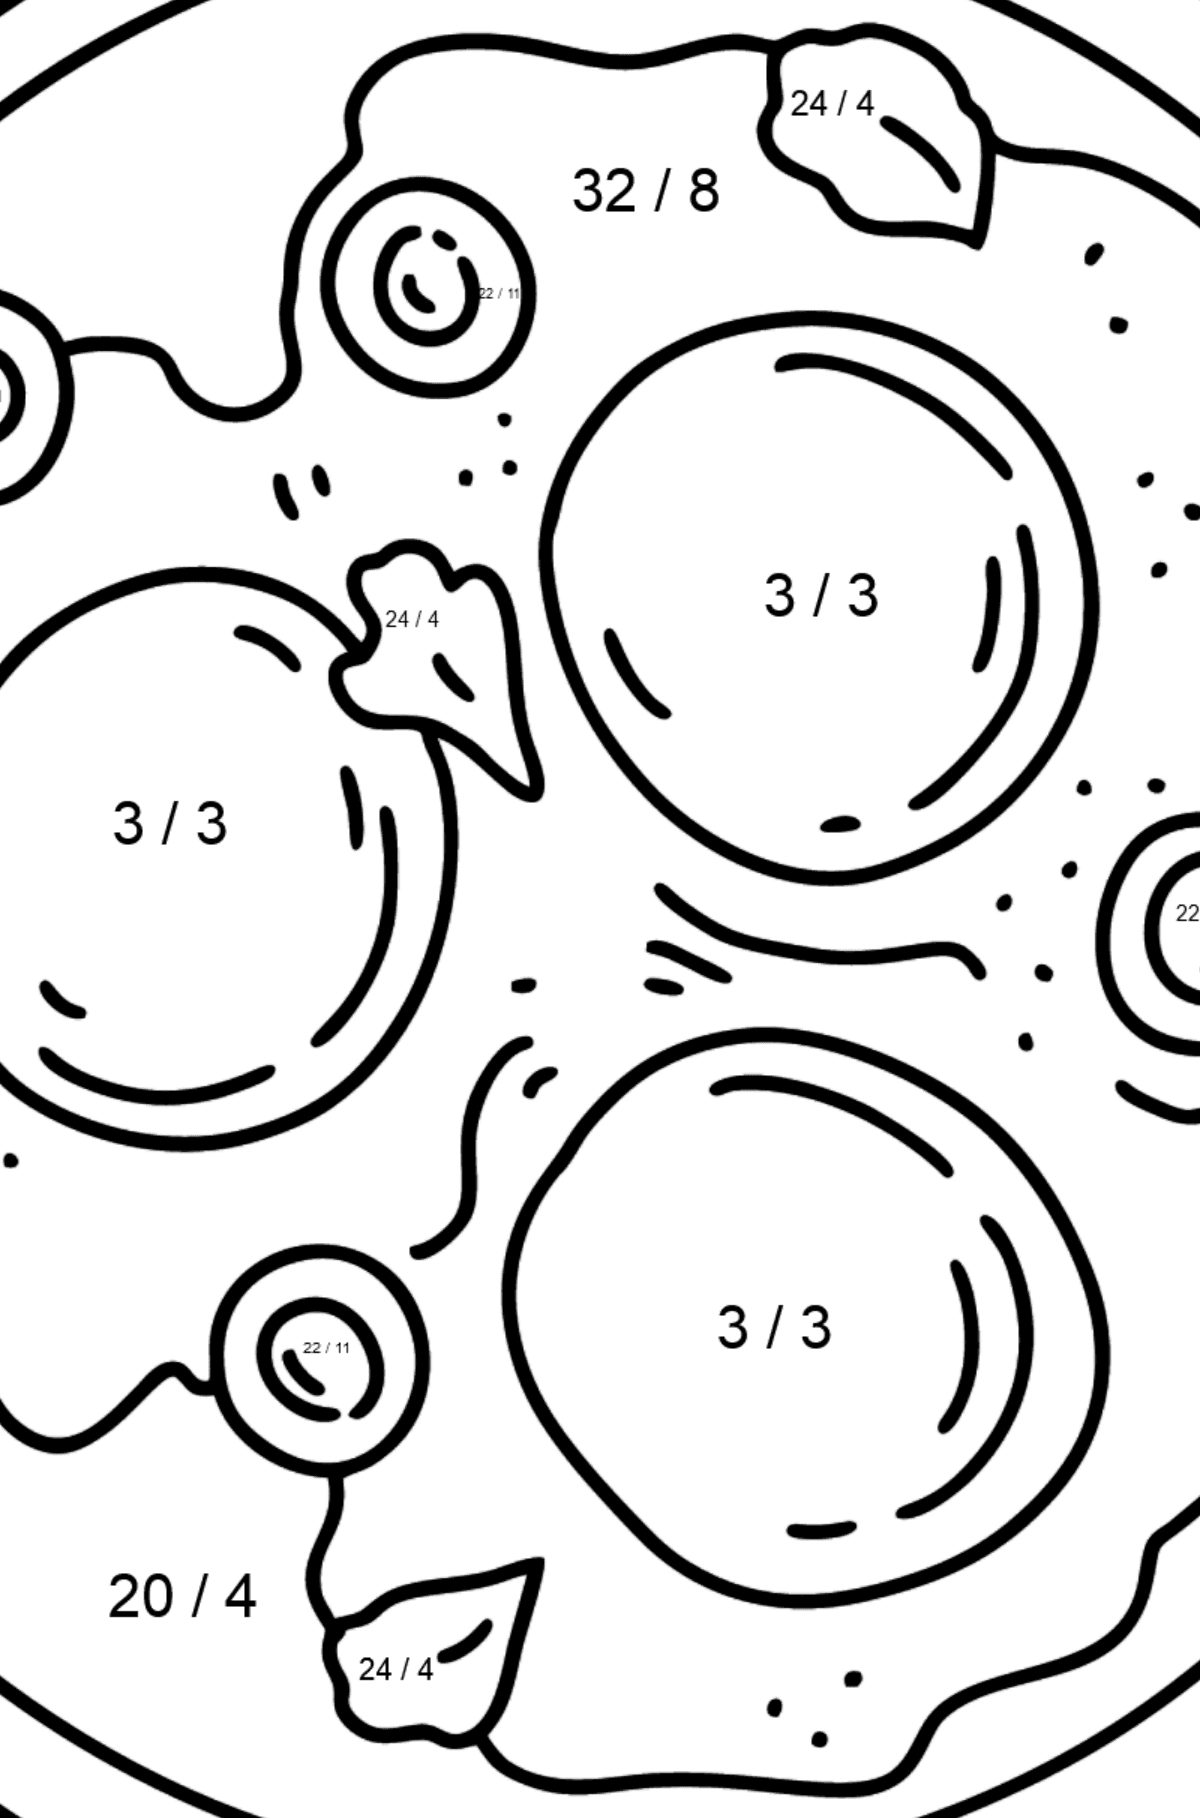 Fried Eggs Fried Egg coloring page - Math Coloring - Division for Kids